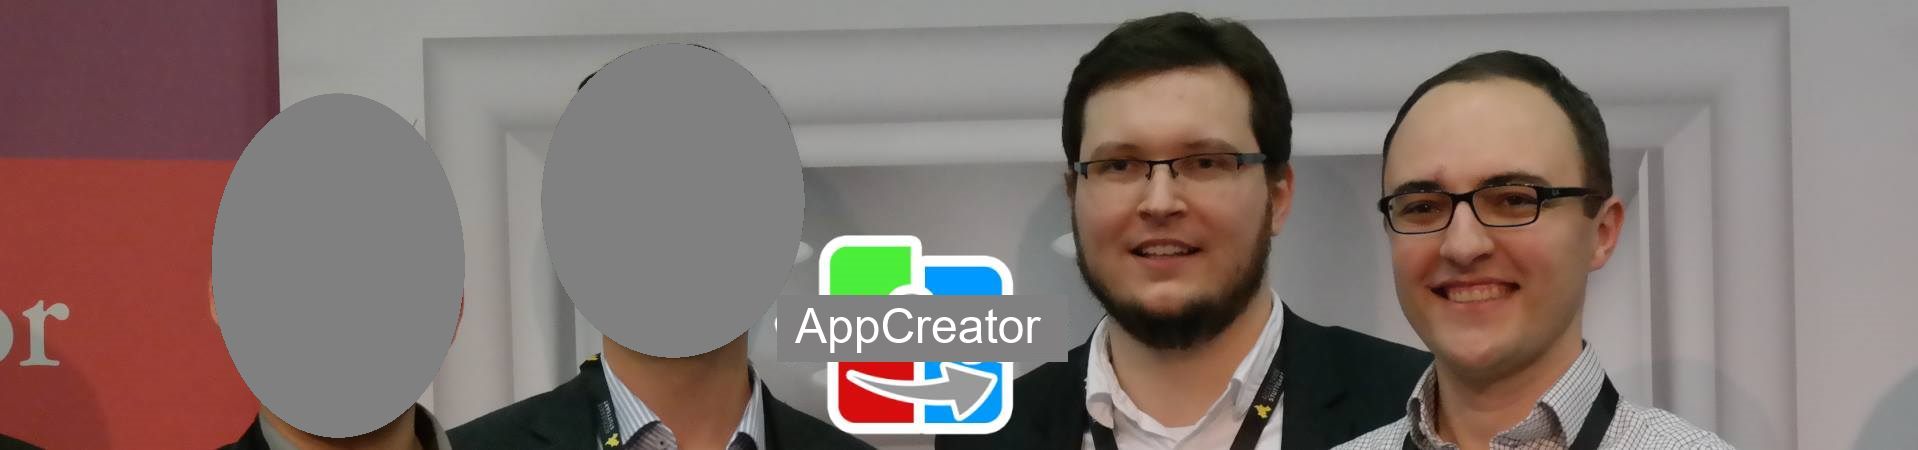 Successful performance for AppCreator at Elevator Pitch BW 2016 in Böblingen feature image